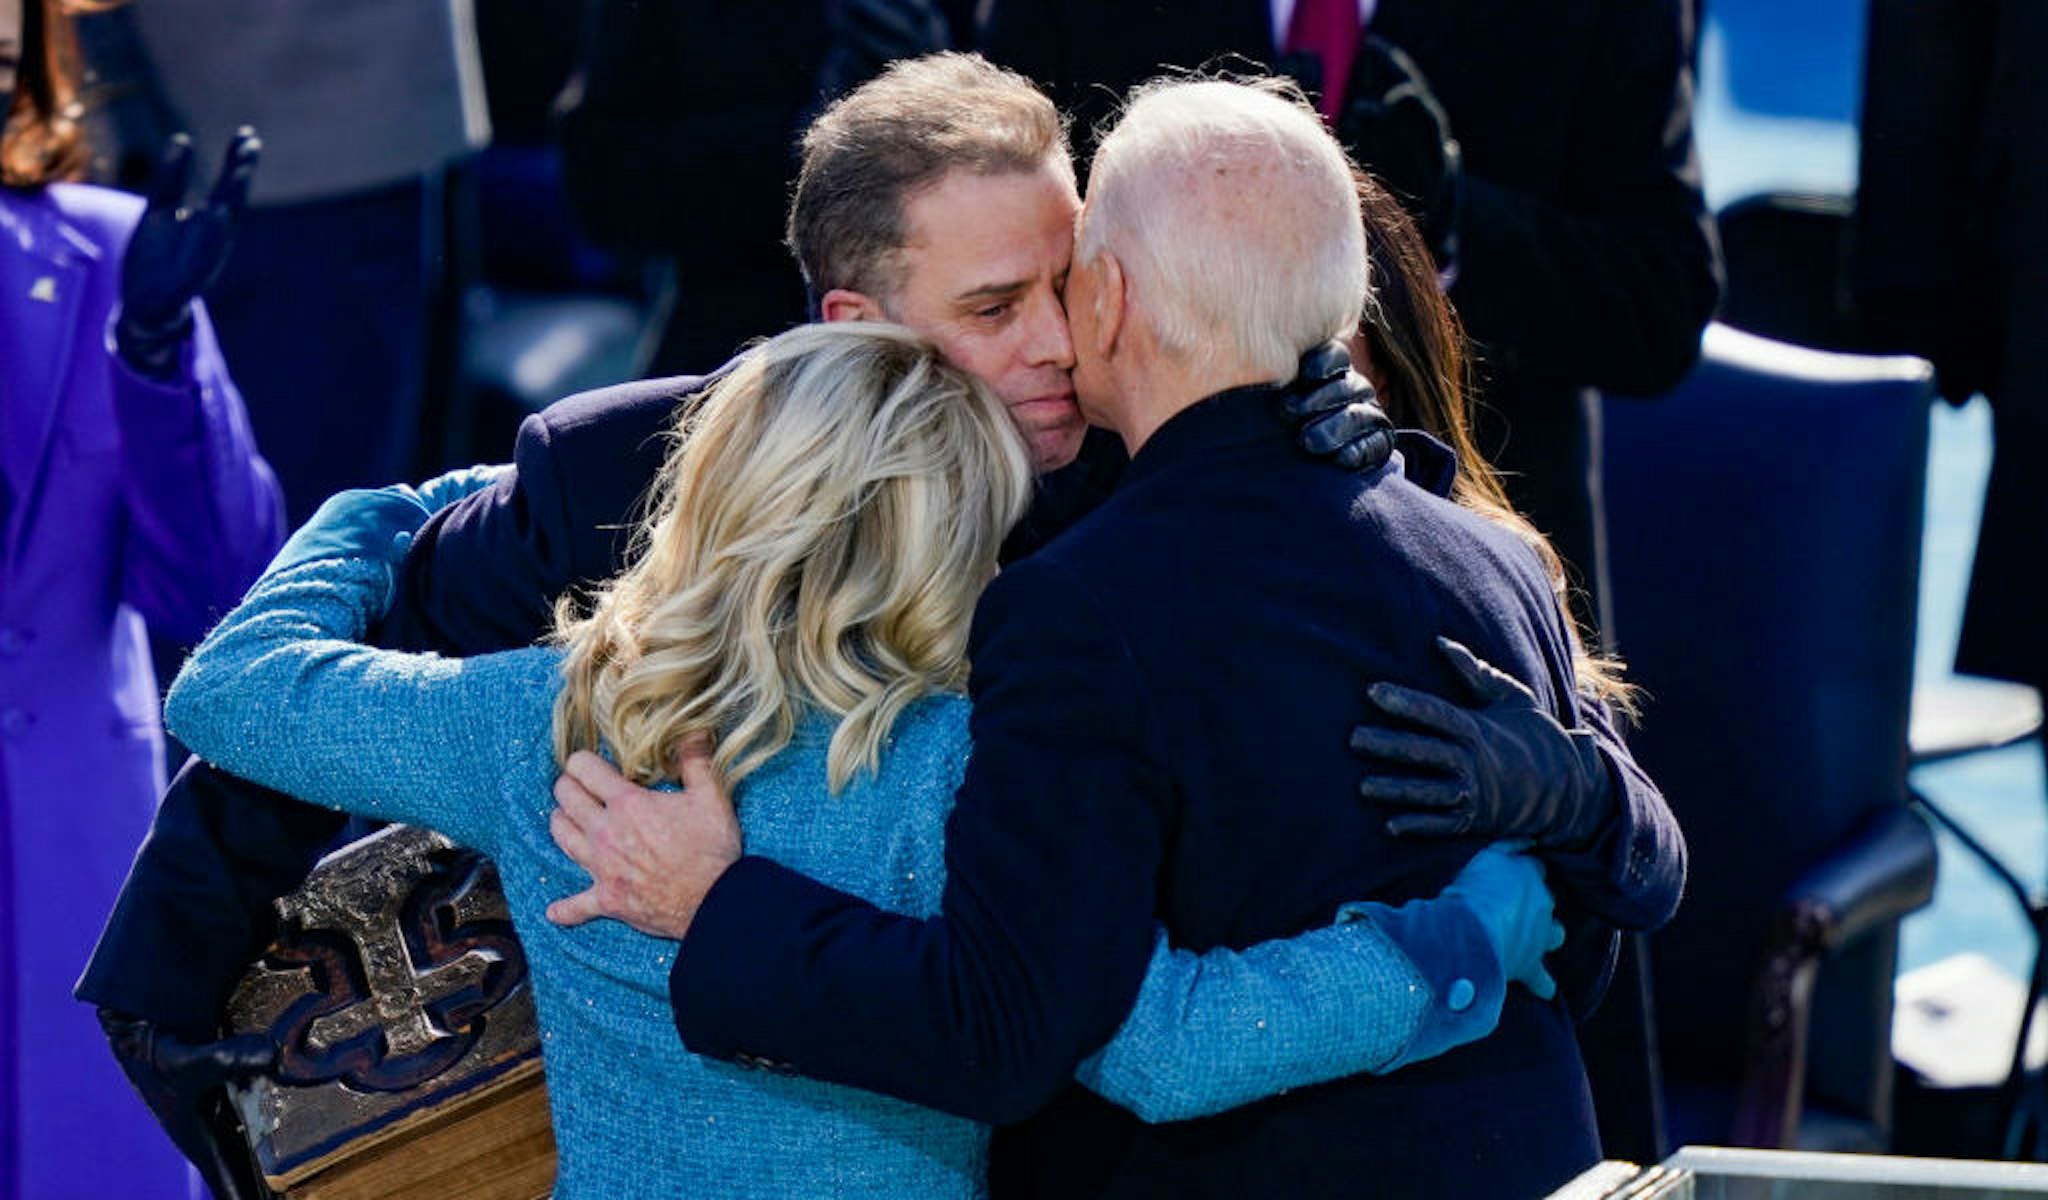 WASHINGTON, DC - JANUARY 20: U.S. President Joe Biden embraces his family First Lady Dr. Jill Biden, son Hunter Biden and daughter Ashley after being sworn in during his inauguation on the West Front of the U.S. Capitol on January 20, 2021 in Washington, DC. During today's inauguration ceremony Joe Biden becomes the 46th president of the United States. (Photo by Drew Angerer/Getty Images)